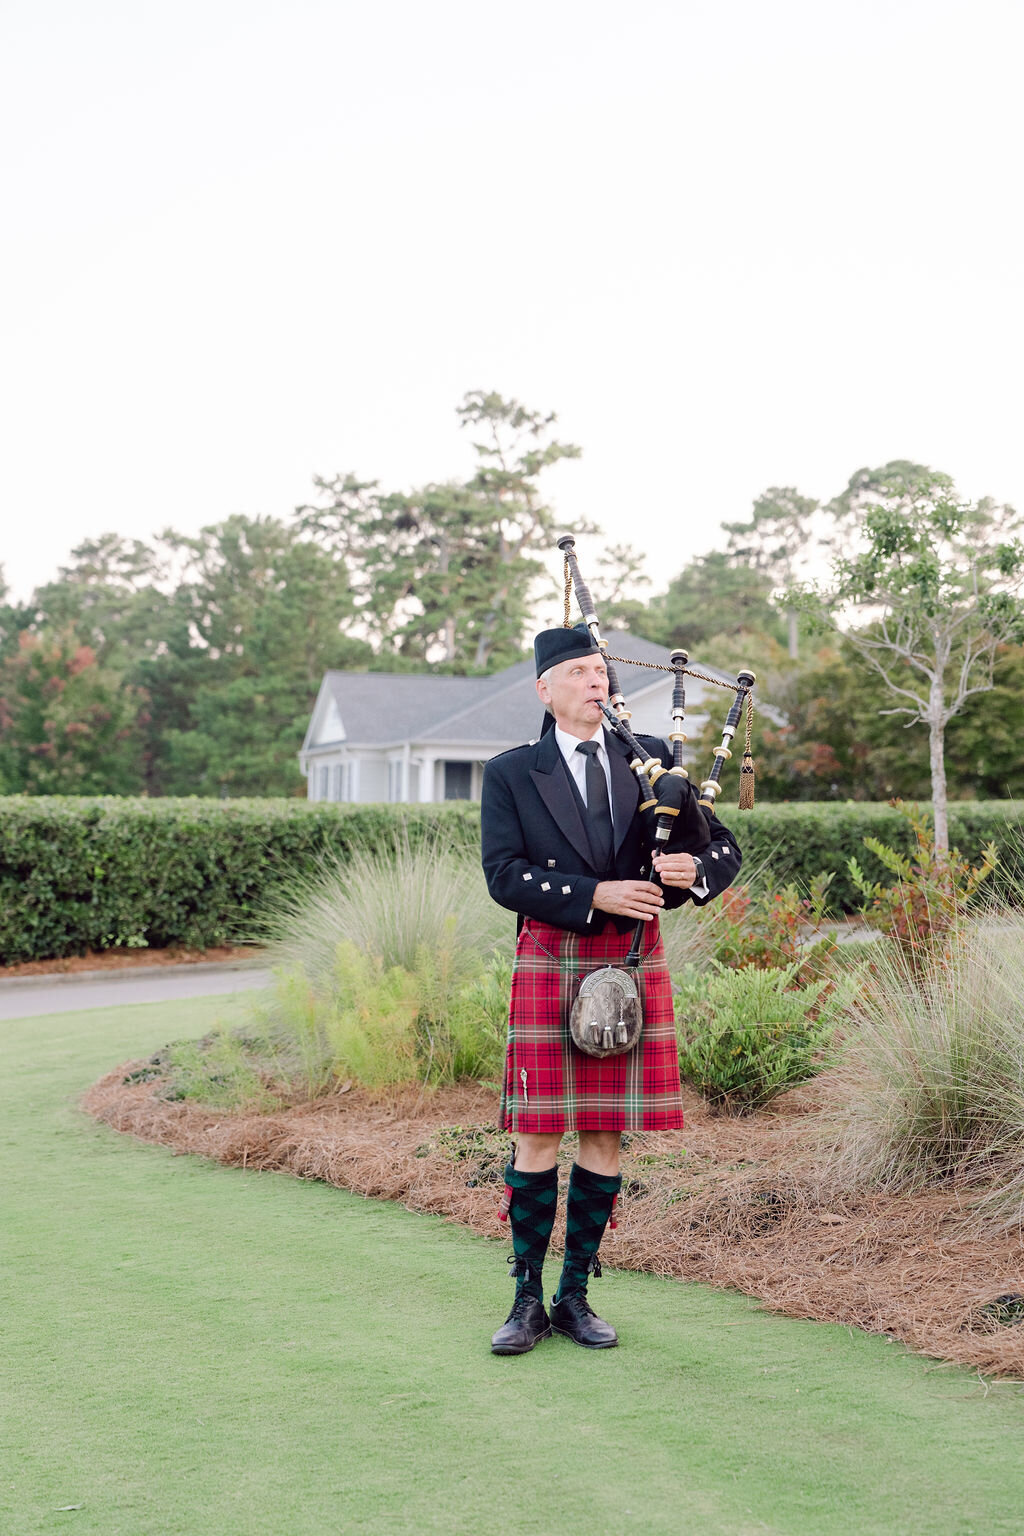 Wedding-planner-in-Athens-Georgia-Southern-Destination-Event-kelliboydphotography-1377